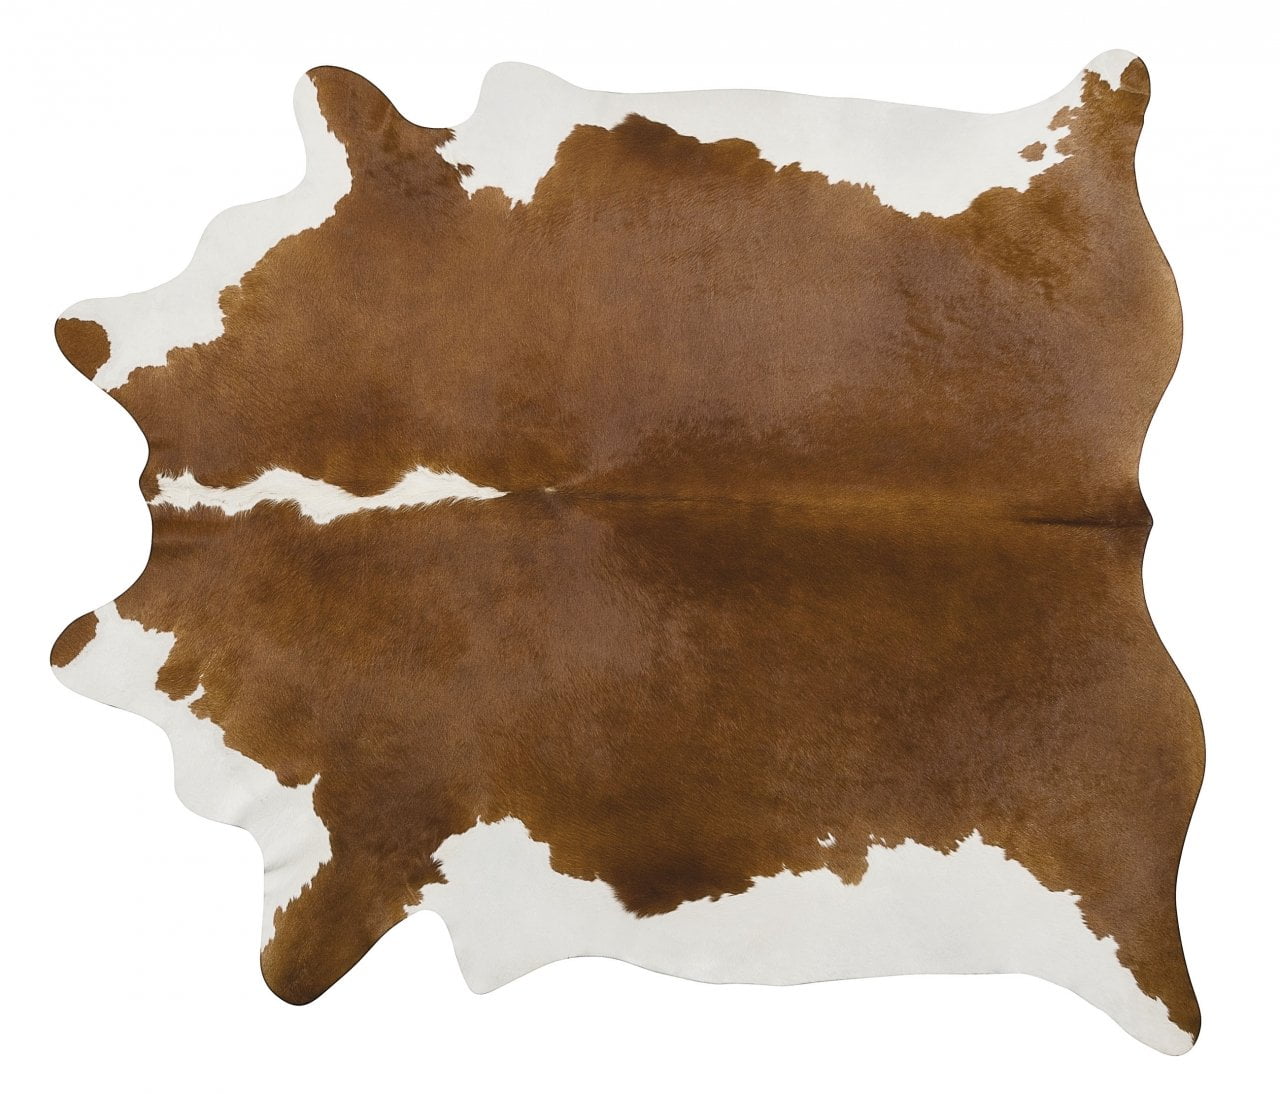 New Brazilian Cowhide Rug Leather HEREFORD BROWN AND WHITE 6'x6' Cow Hide 